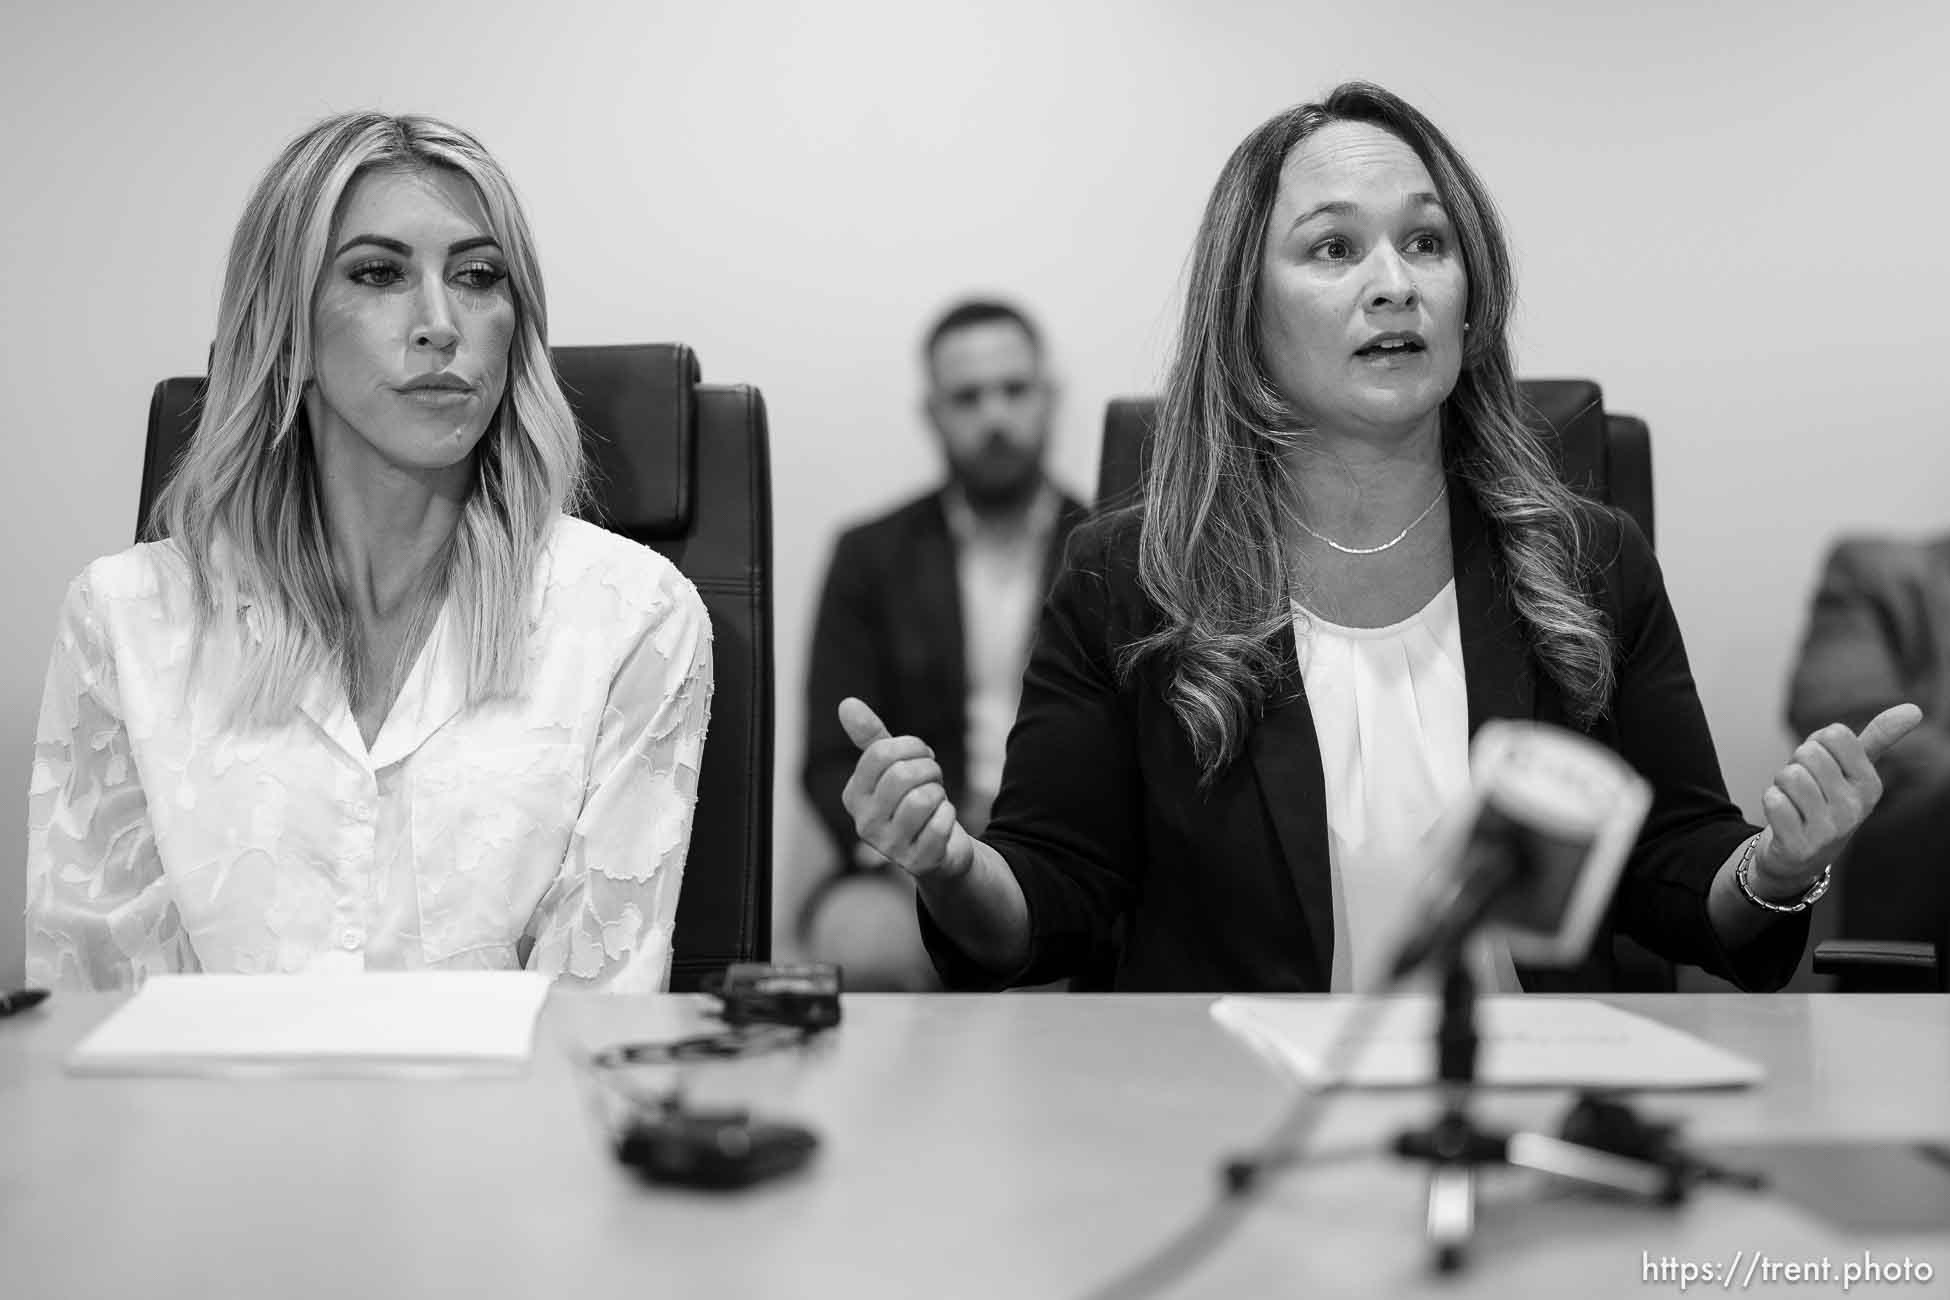 (Trent Nelson  |  The Salt Lake Tribune) The women who are accusing Tim Ballard of sexual misconduct hold a news conference in Salt Lake City on Tuesday, Nov. 21, 2023. From left are Kira Lynch and Jordana (Bree) Righter.